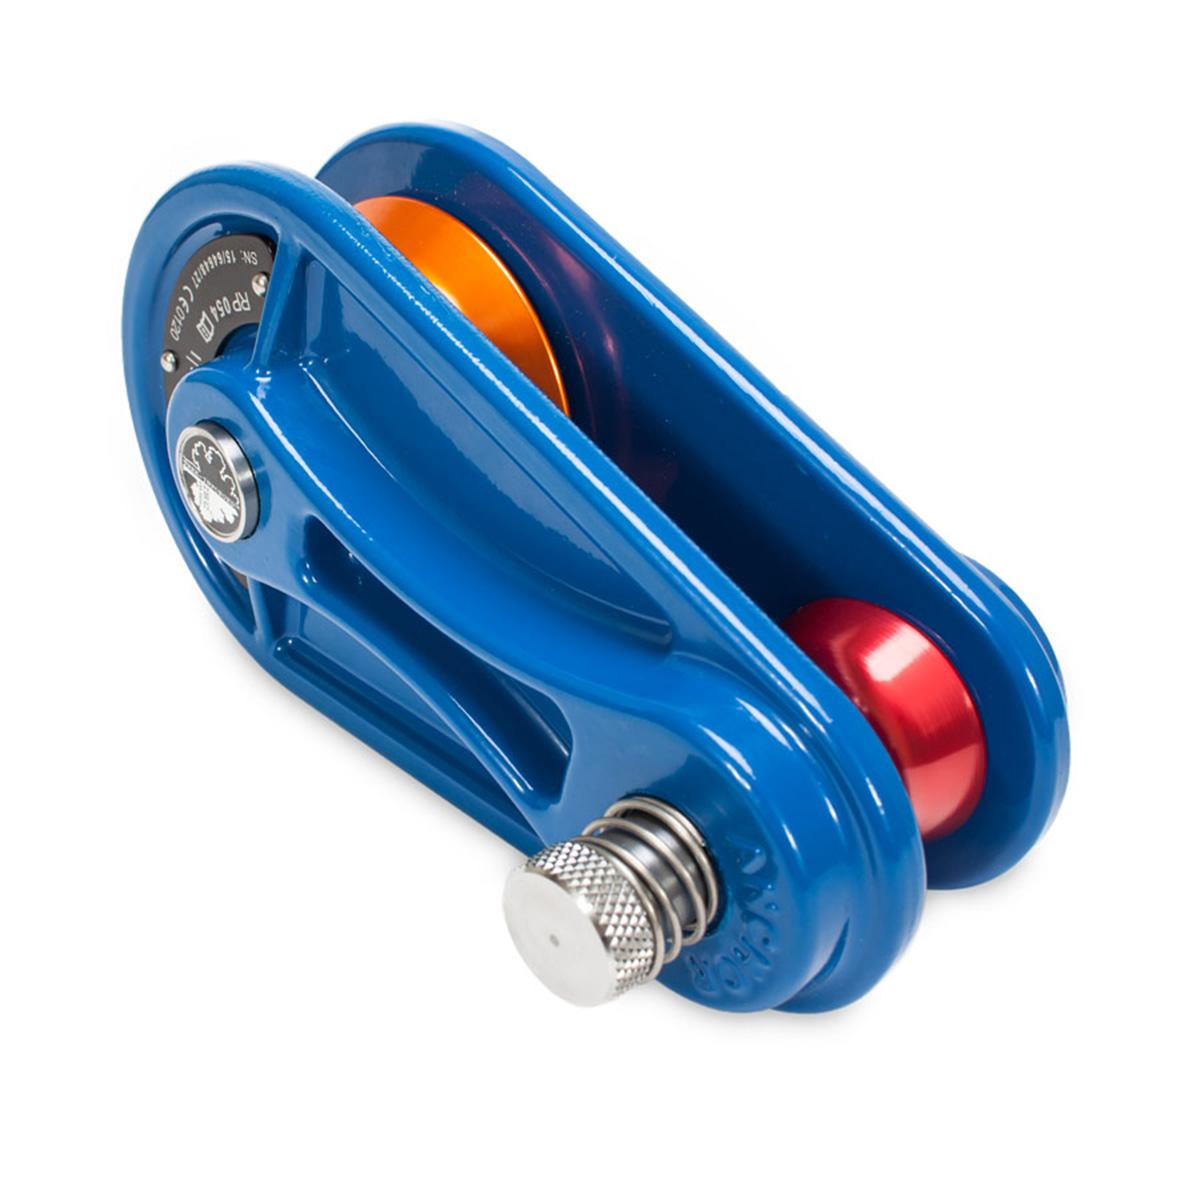 Pulley Block for 5/8 Rope - Blue